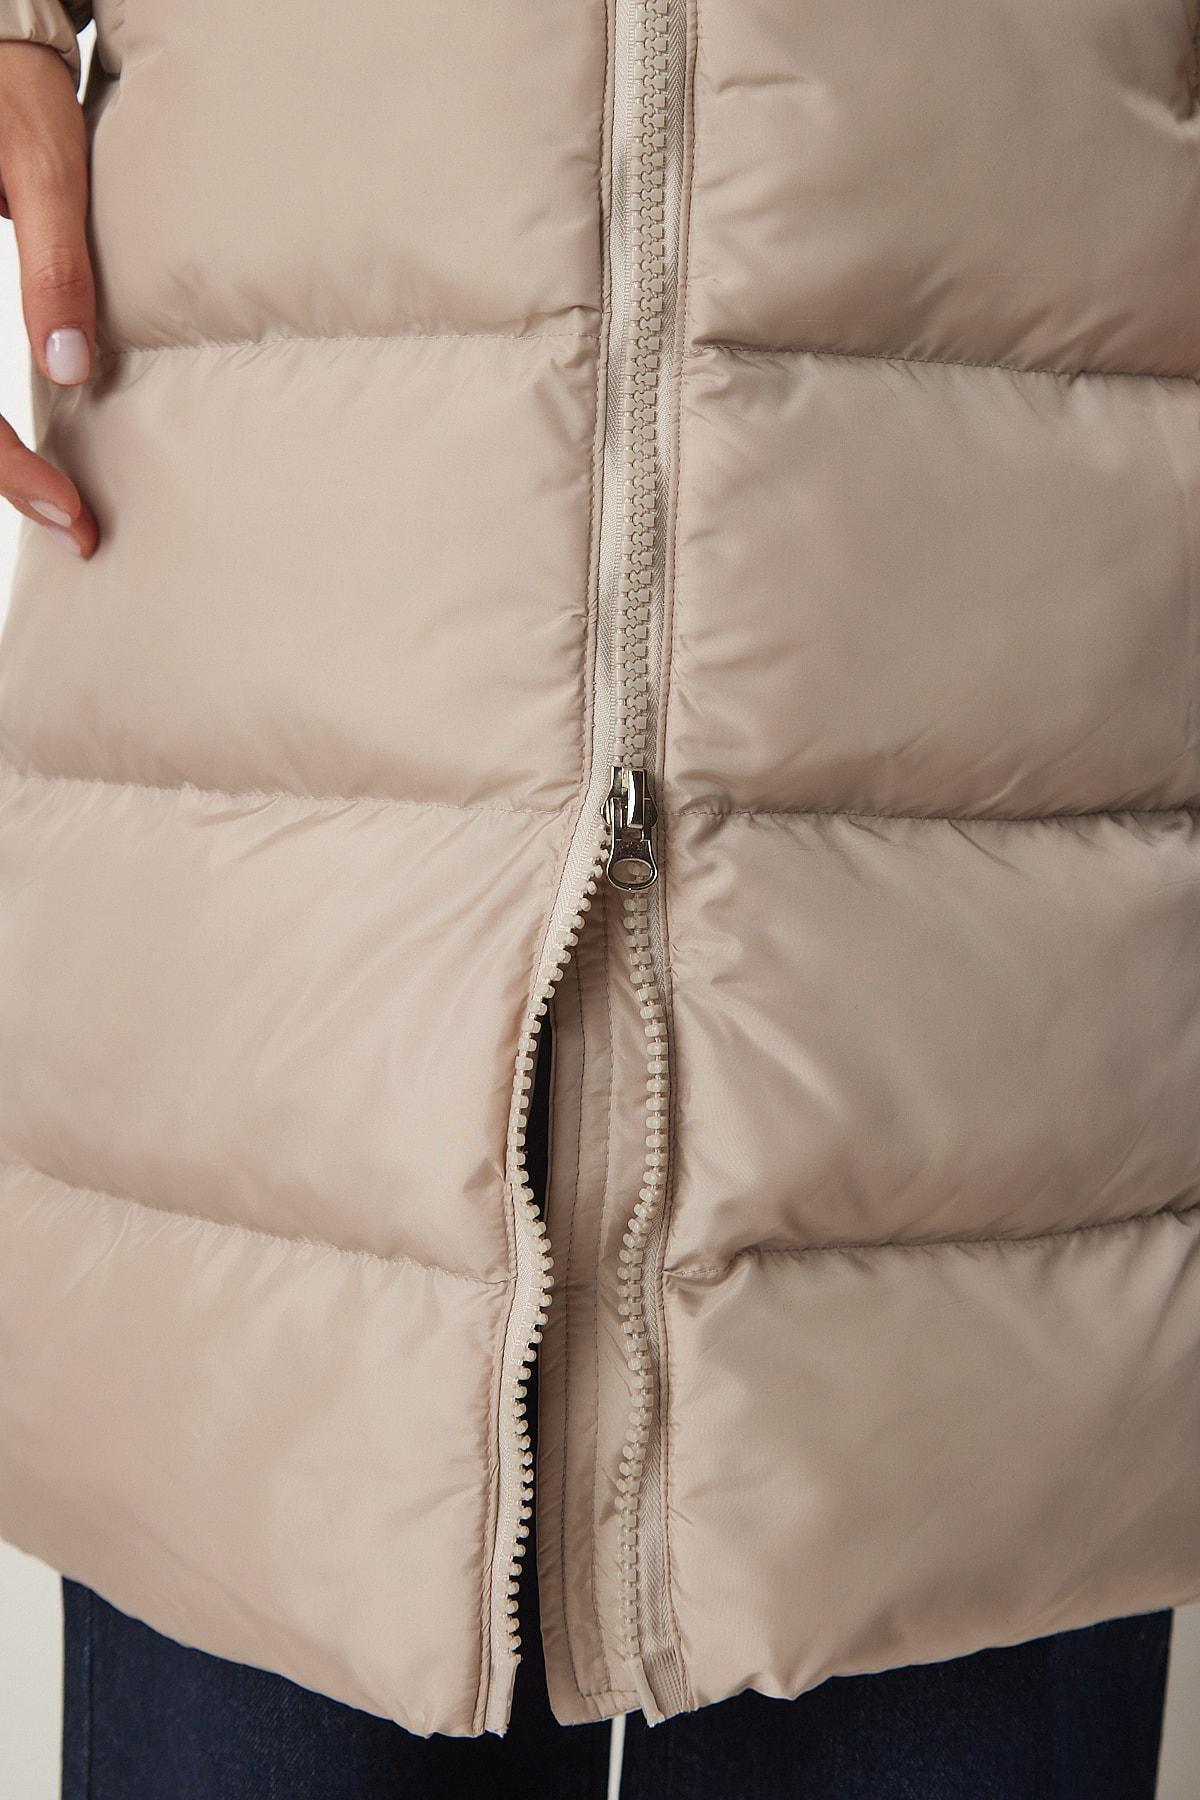 Happiness Istanbul - Beige Hooded Long Down Coat